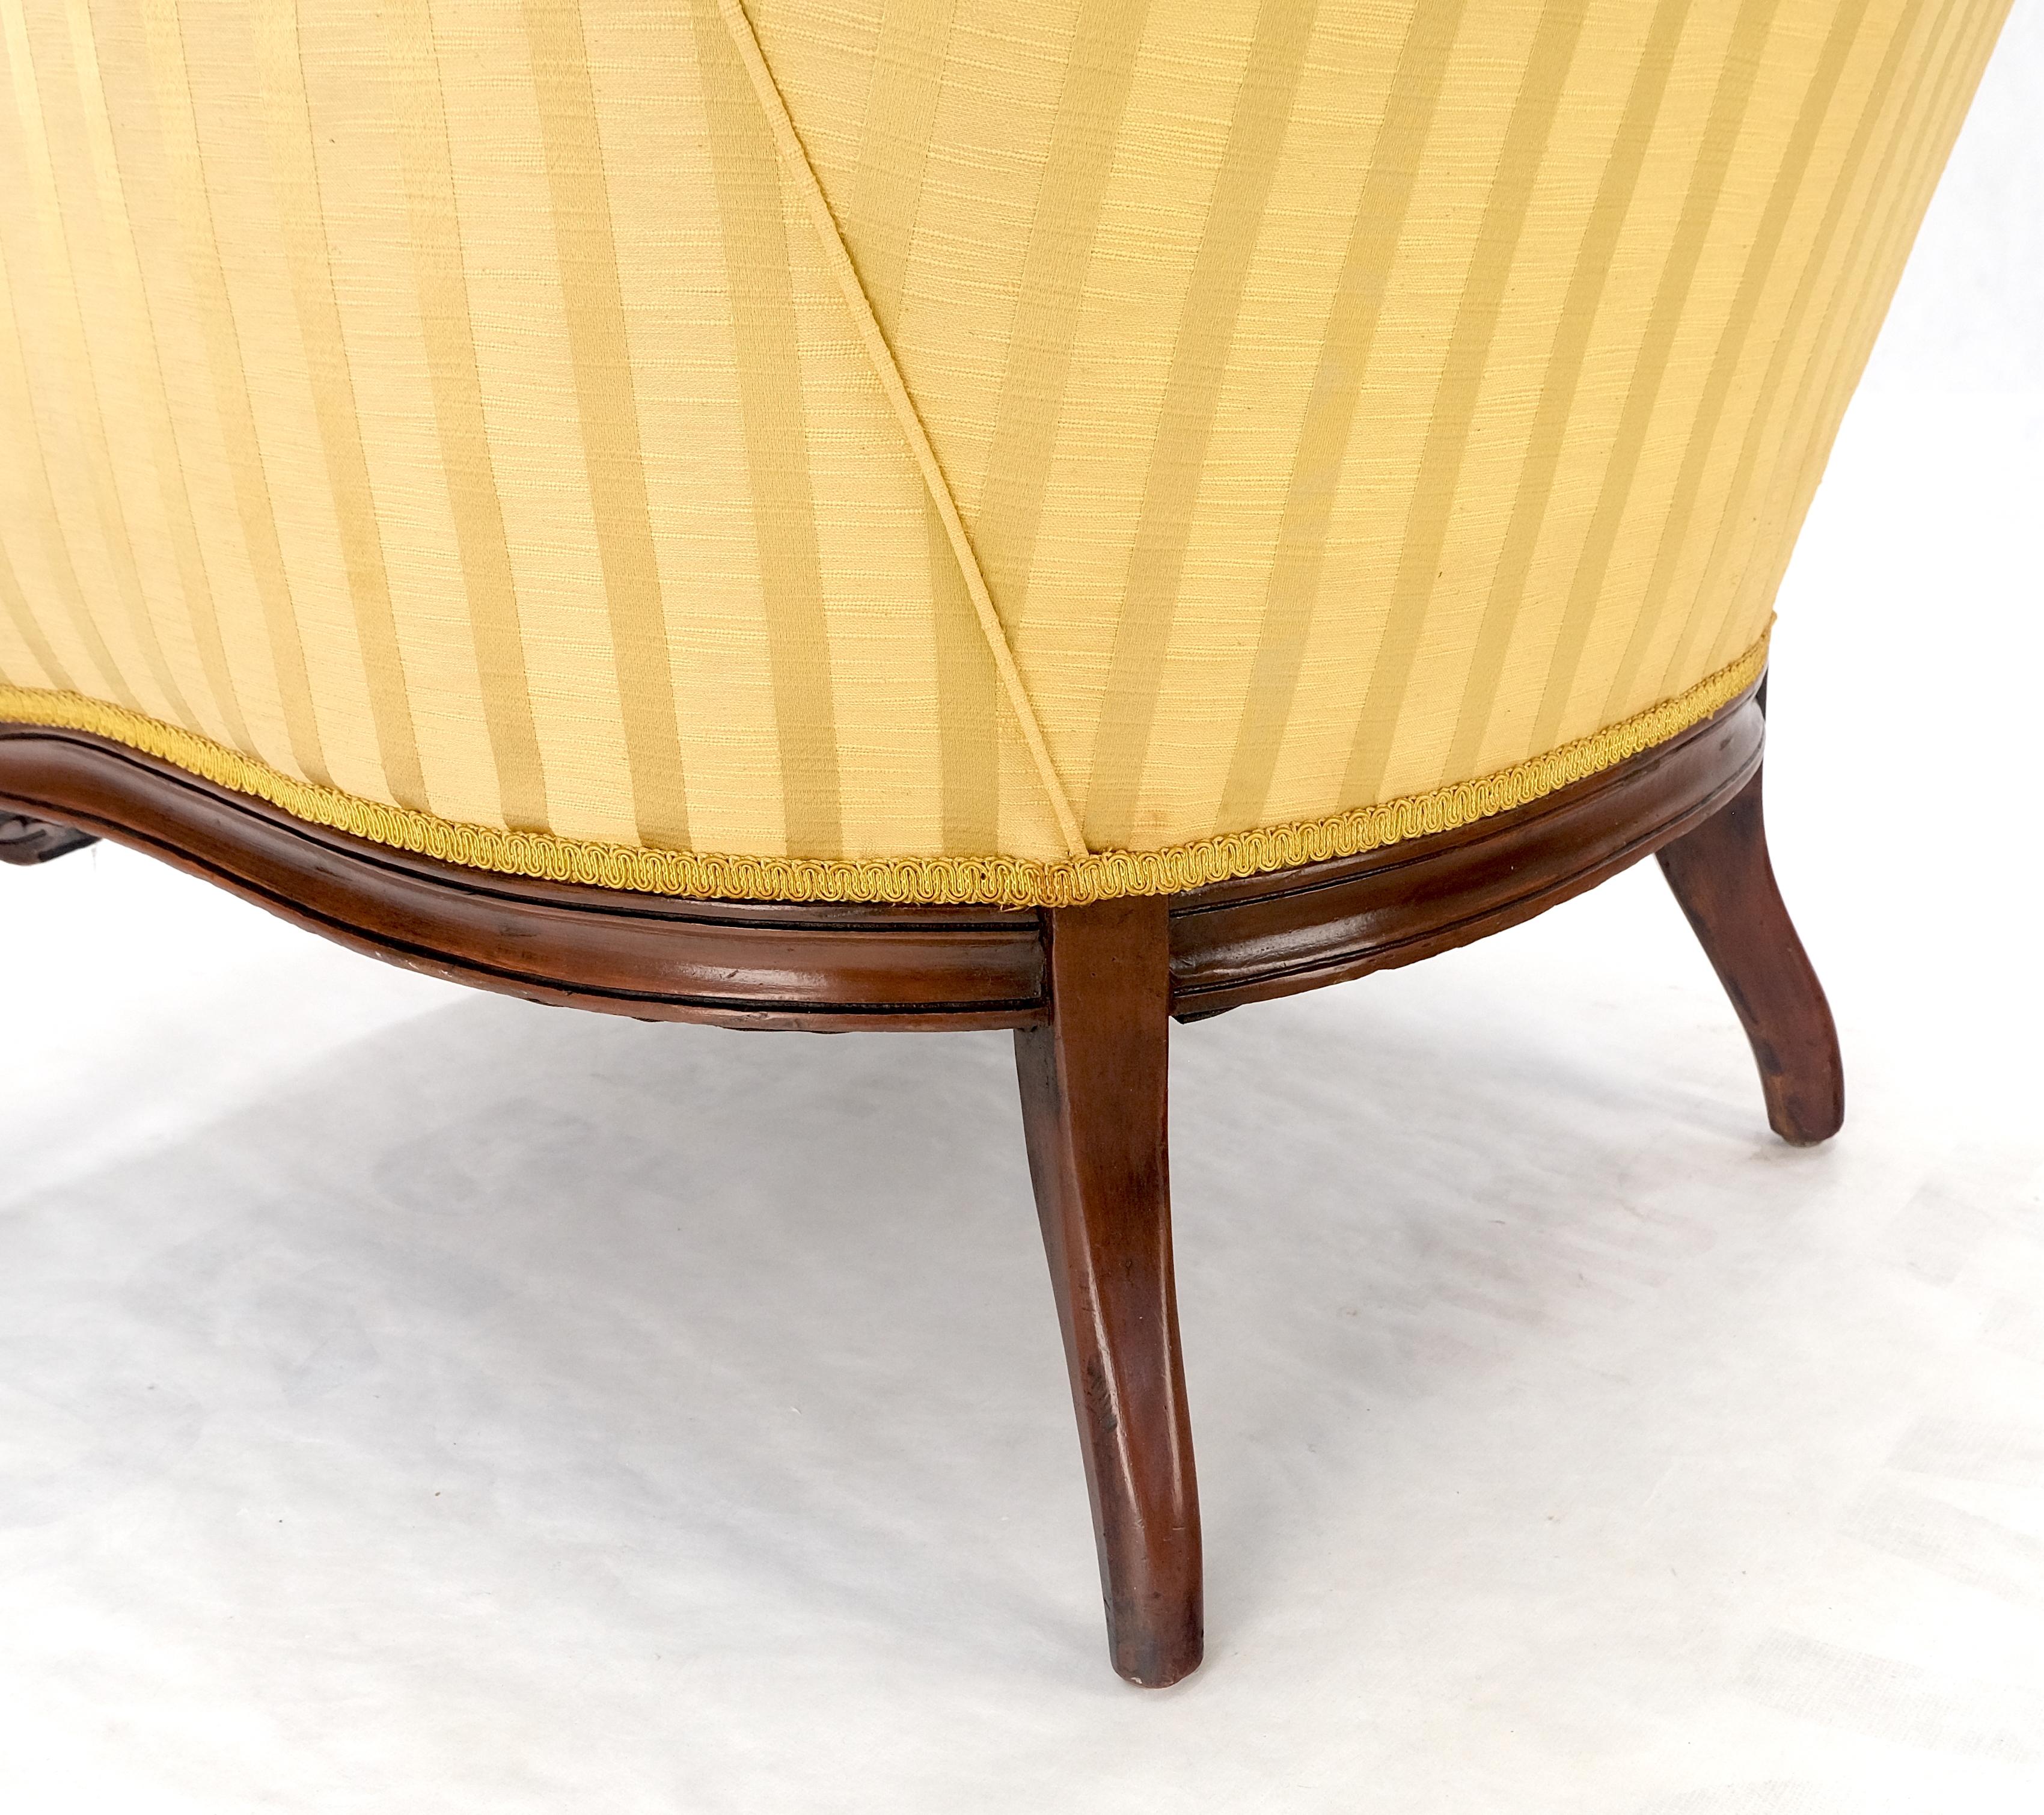 Striped Gold Upholstery Fine Deep Carved Mahogany Frame Lounge Chair Solid Frame For Sale 9